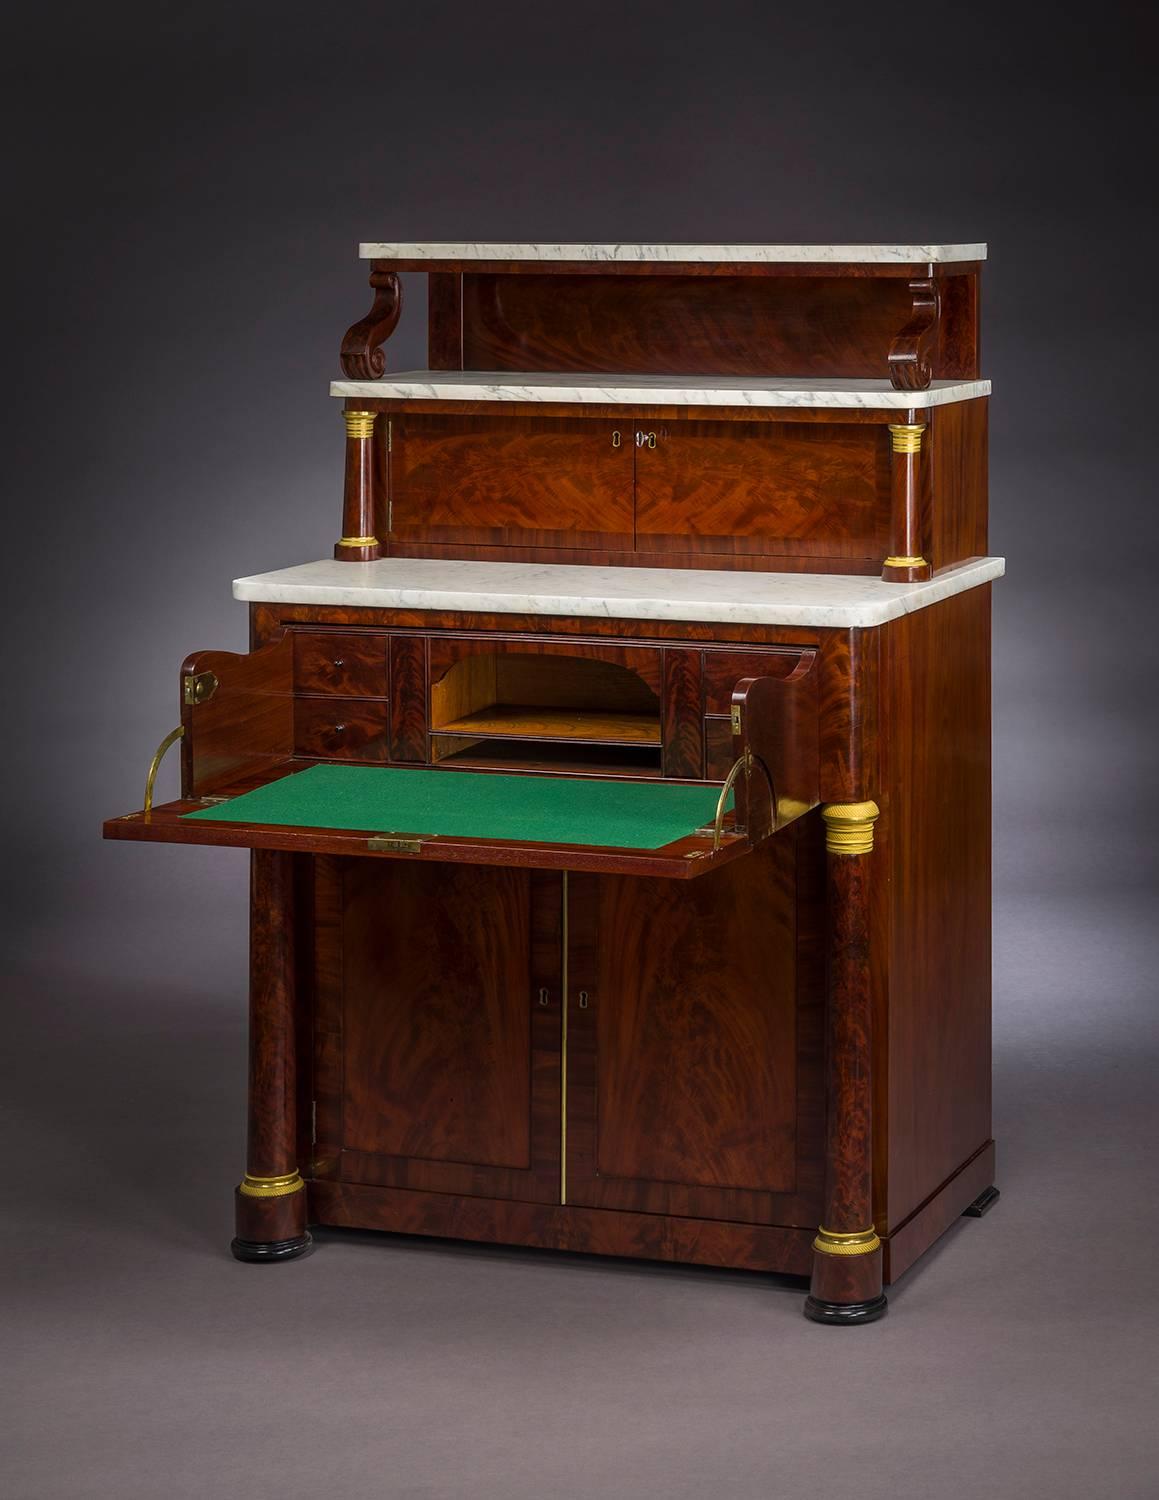 Butler’s Desk and Etagére, circa 1825
New York, possibly by Duncan Phyfe
Mahogany (secondary woods: mahogany, pine, poplar), with ormolu mounts, marble, and brass
54 in. high, 36 5/8 in. wide, 23 5/8 in. deep
EX. COLL.: Buffalo, New York,